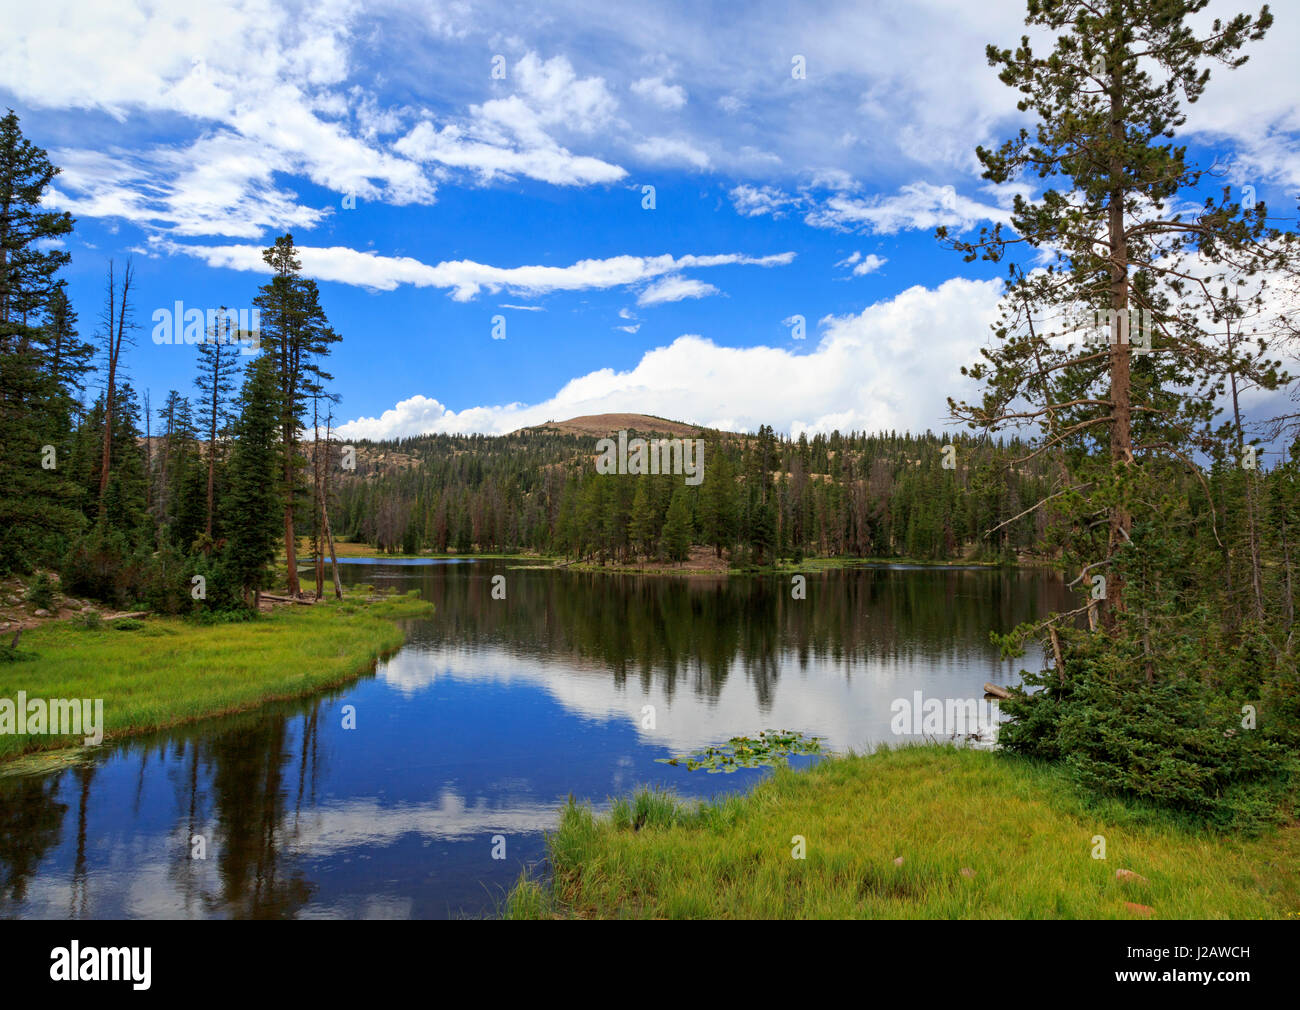 This is a view of Butterfly Lake near the top of the Mirror Lake Scenic Byway in the Uinta Mountains, about 30 miles north of Kamas, Utah. Stock Photo